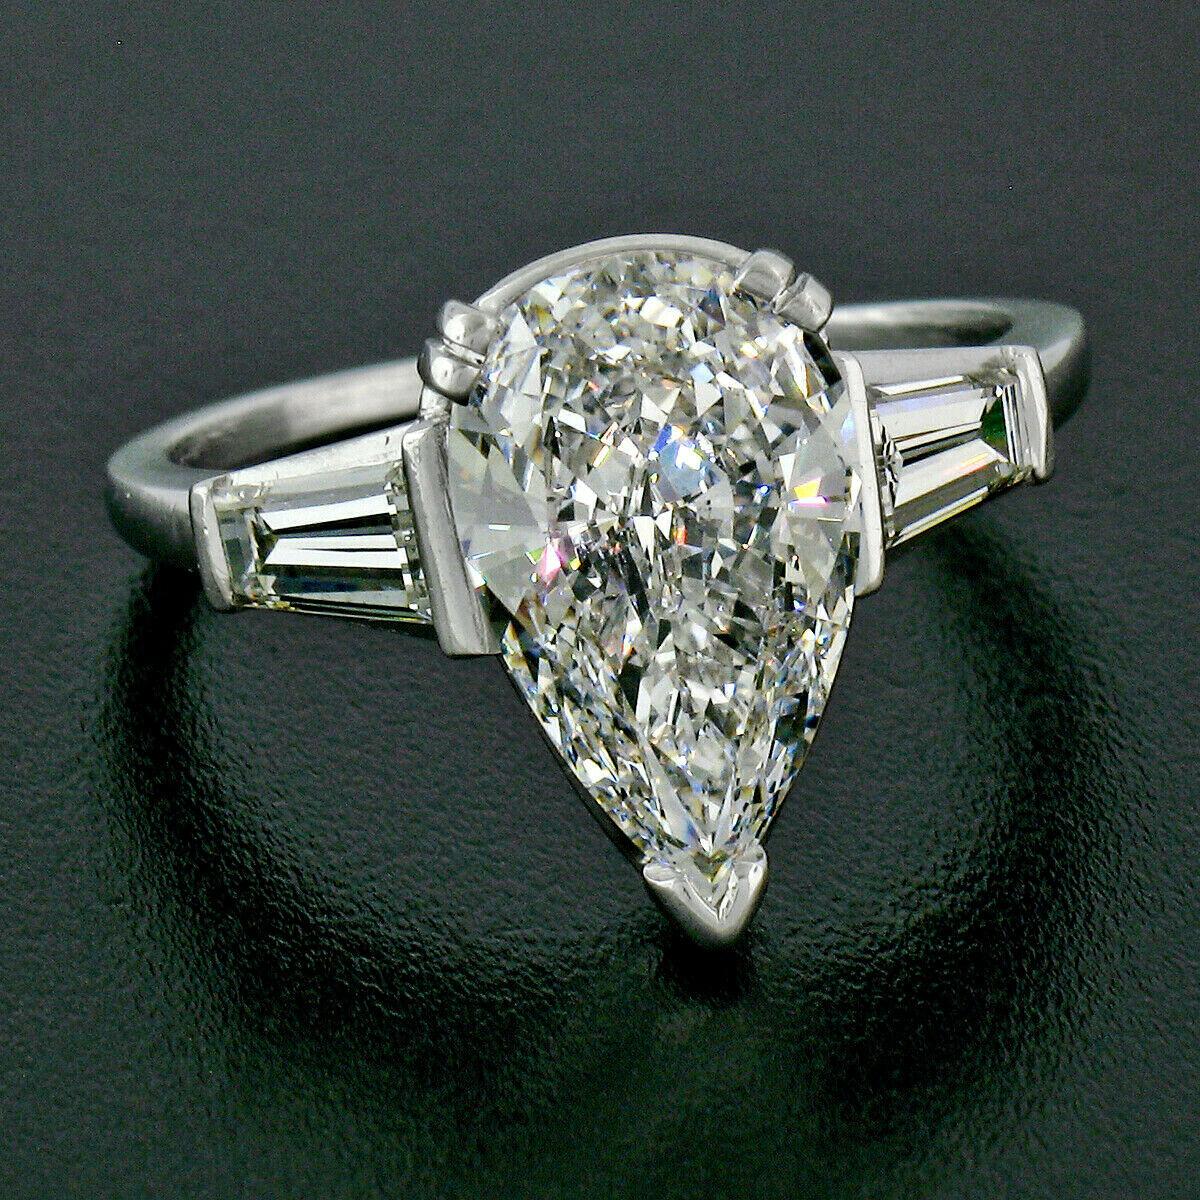 This breathtaking vintage engagement ring was hand crafted in solid .900 platinum and features a jaw dropping, GIA certified pear brilliant cut diamond which is neatly and very finely prong set at the center of this classically designed ring. The